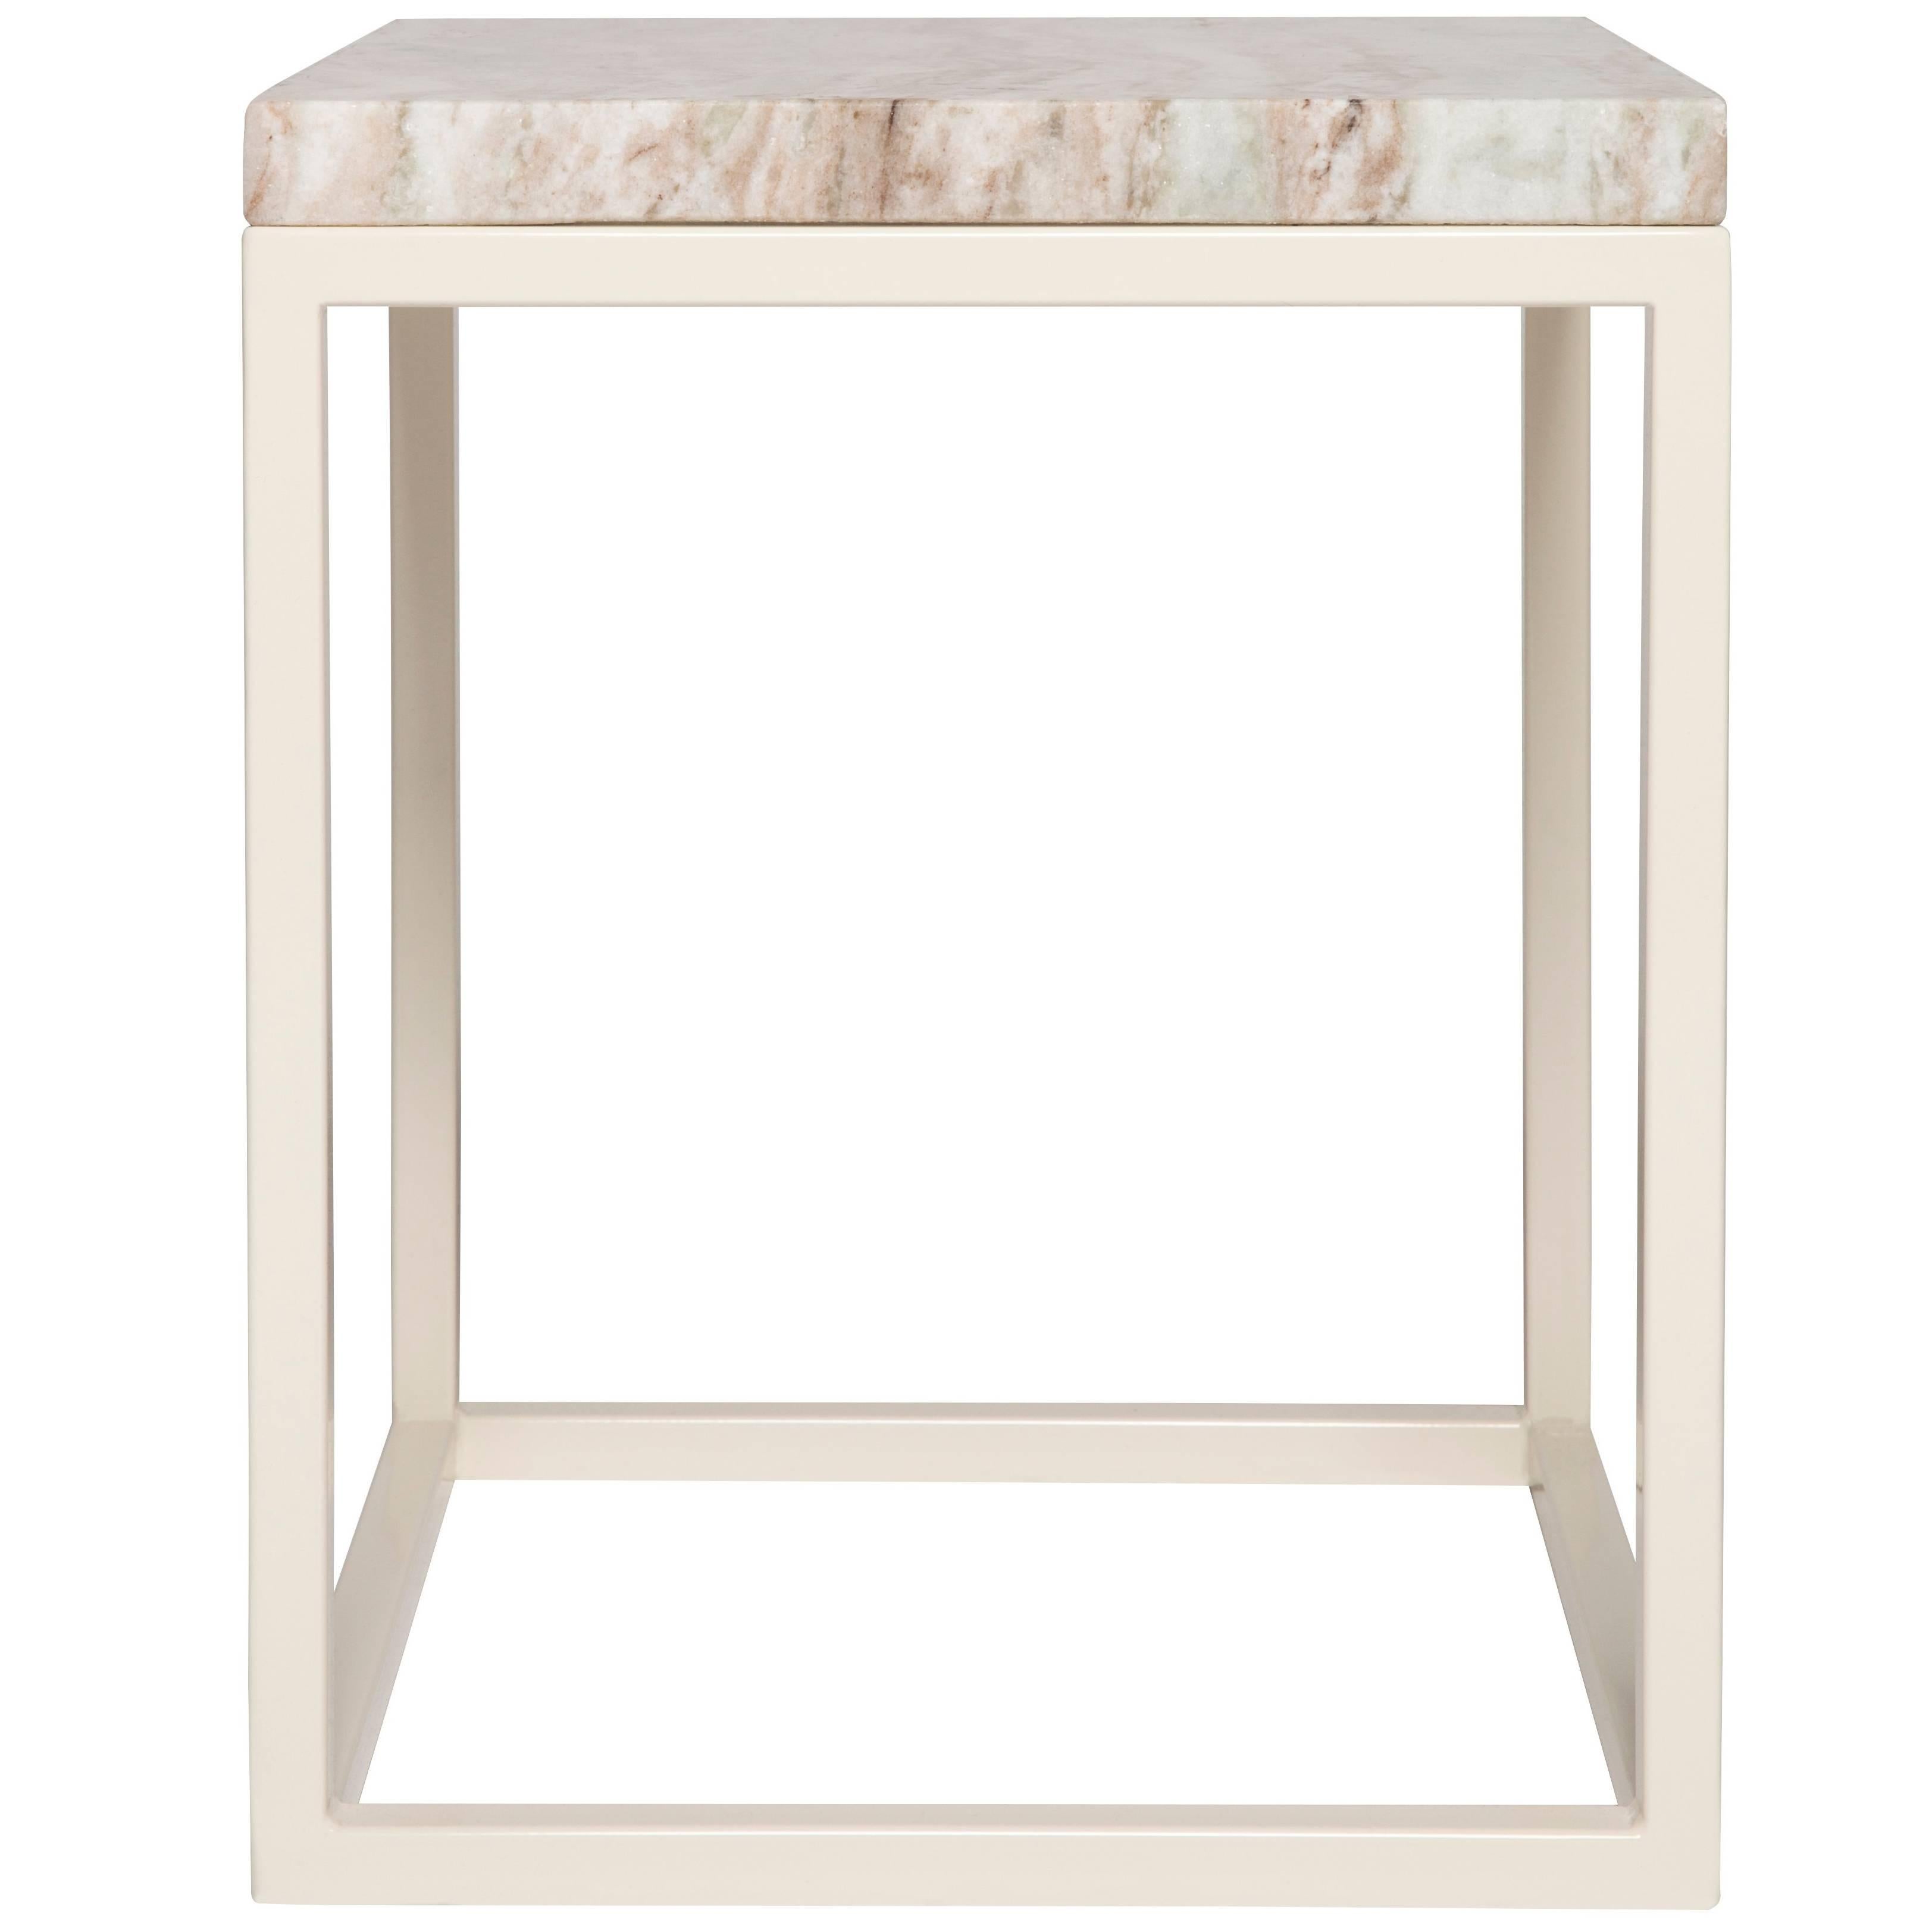  Frame Side Table by Pieces, Modern Customizable End Table in Stone Glass Wood